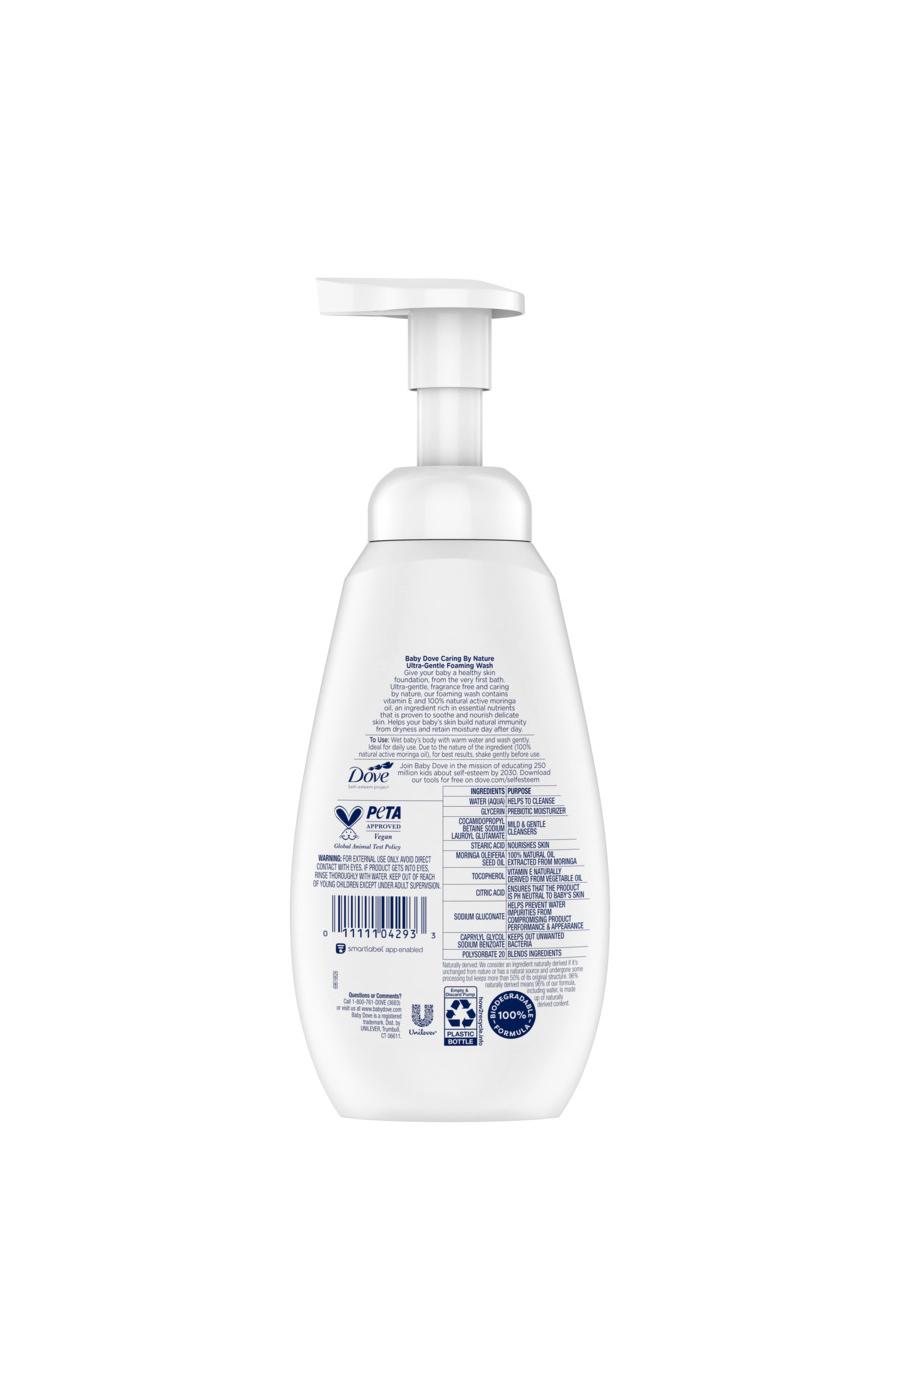 Baby Dove Ultra Gentle Foaming Wash with Vitamin E and 100% Natural Moringa Oil; image 4 of 5